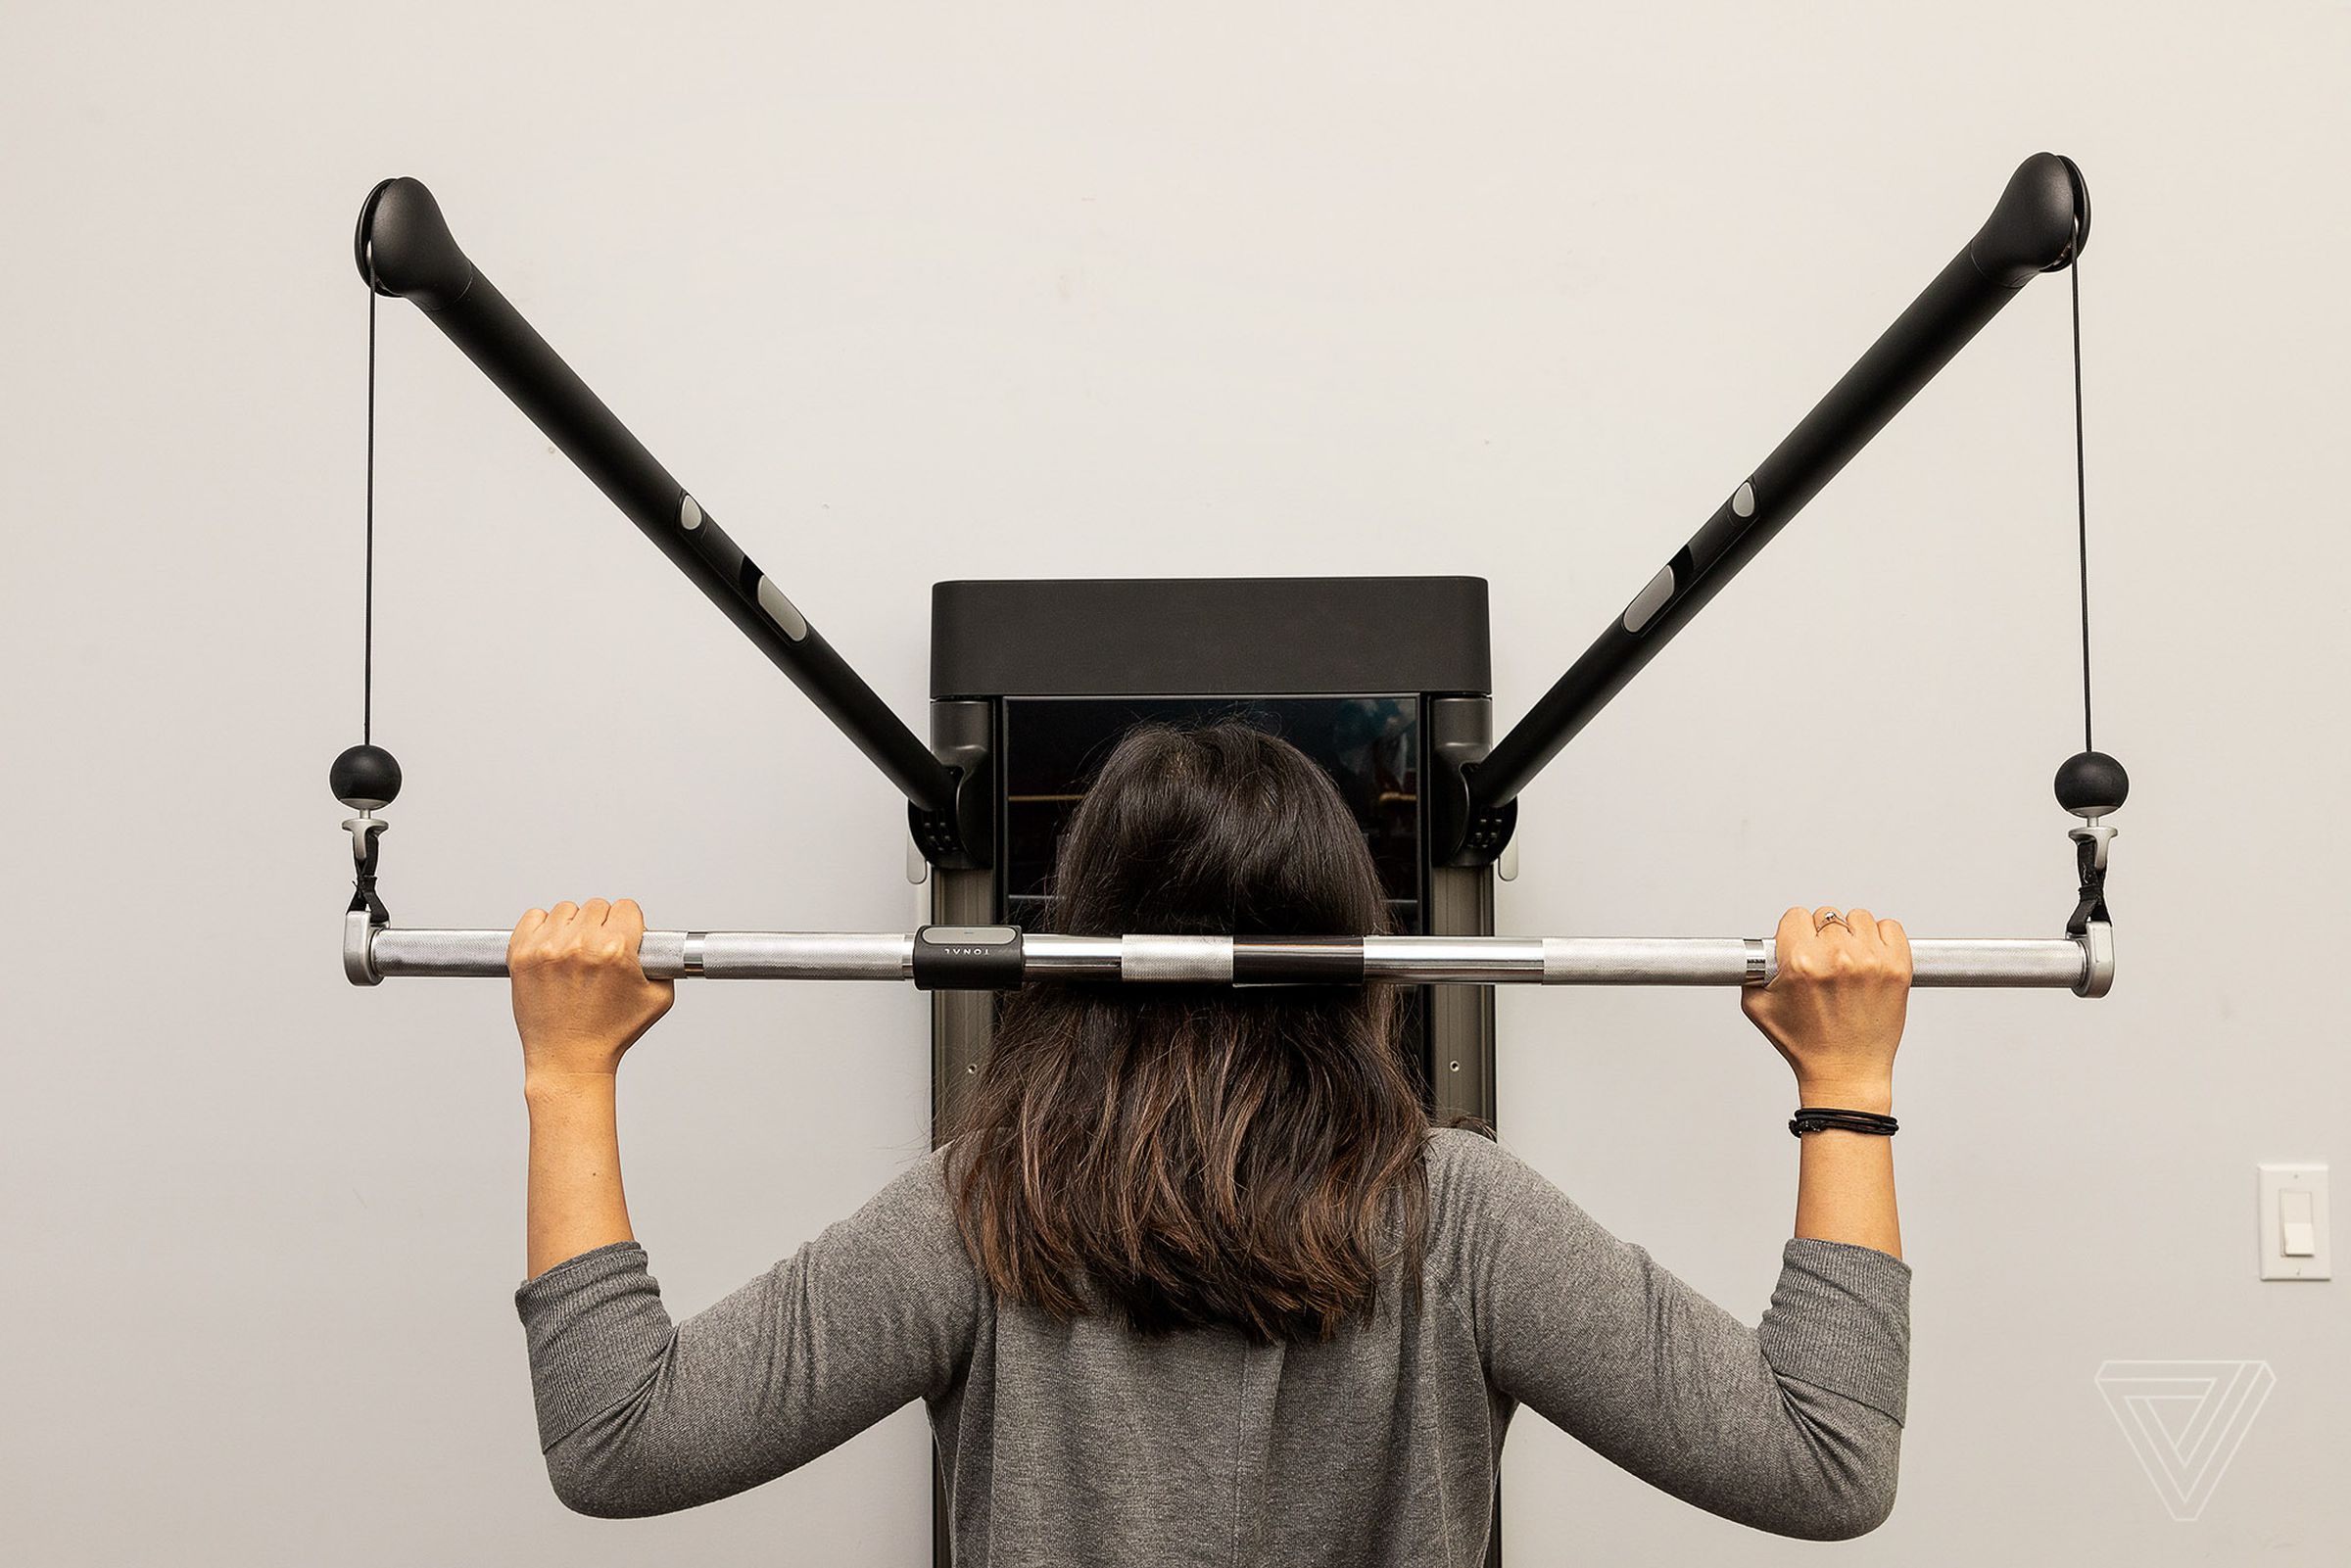 Tonal’s wall-mounted device has interchangeable handles for a variety of exercises.